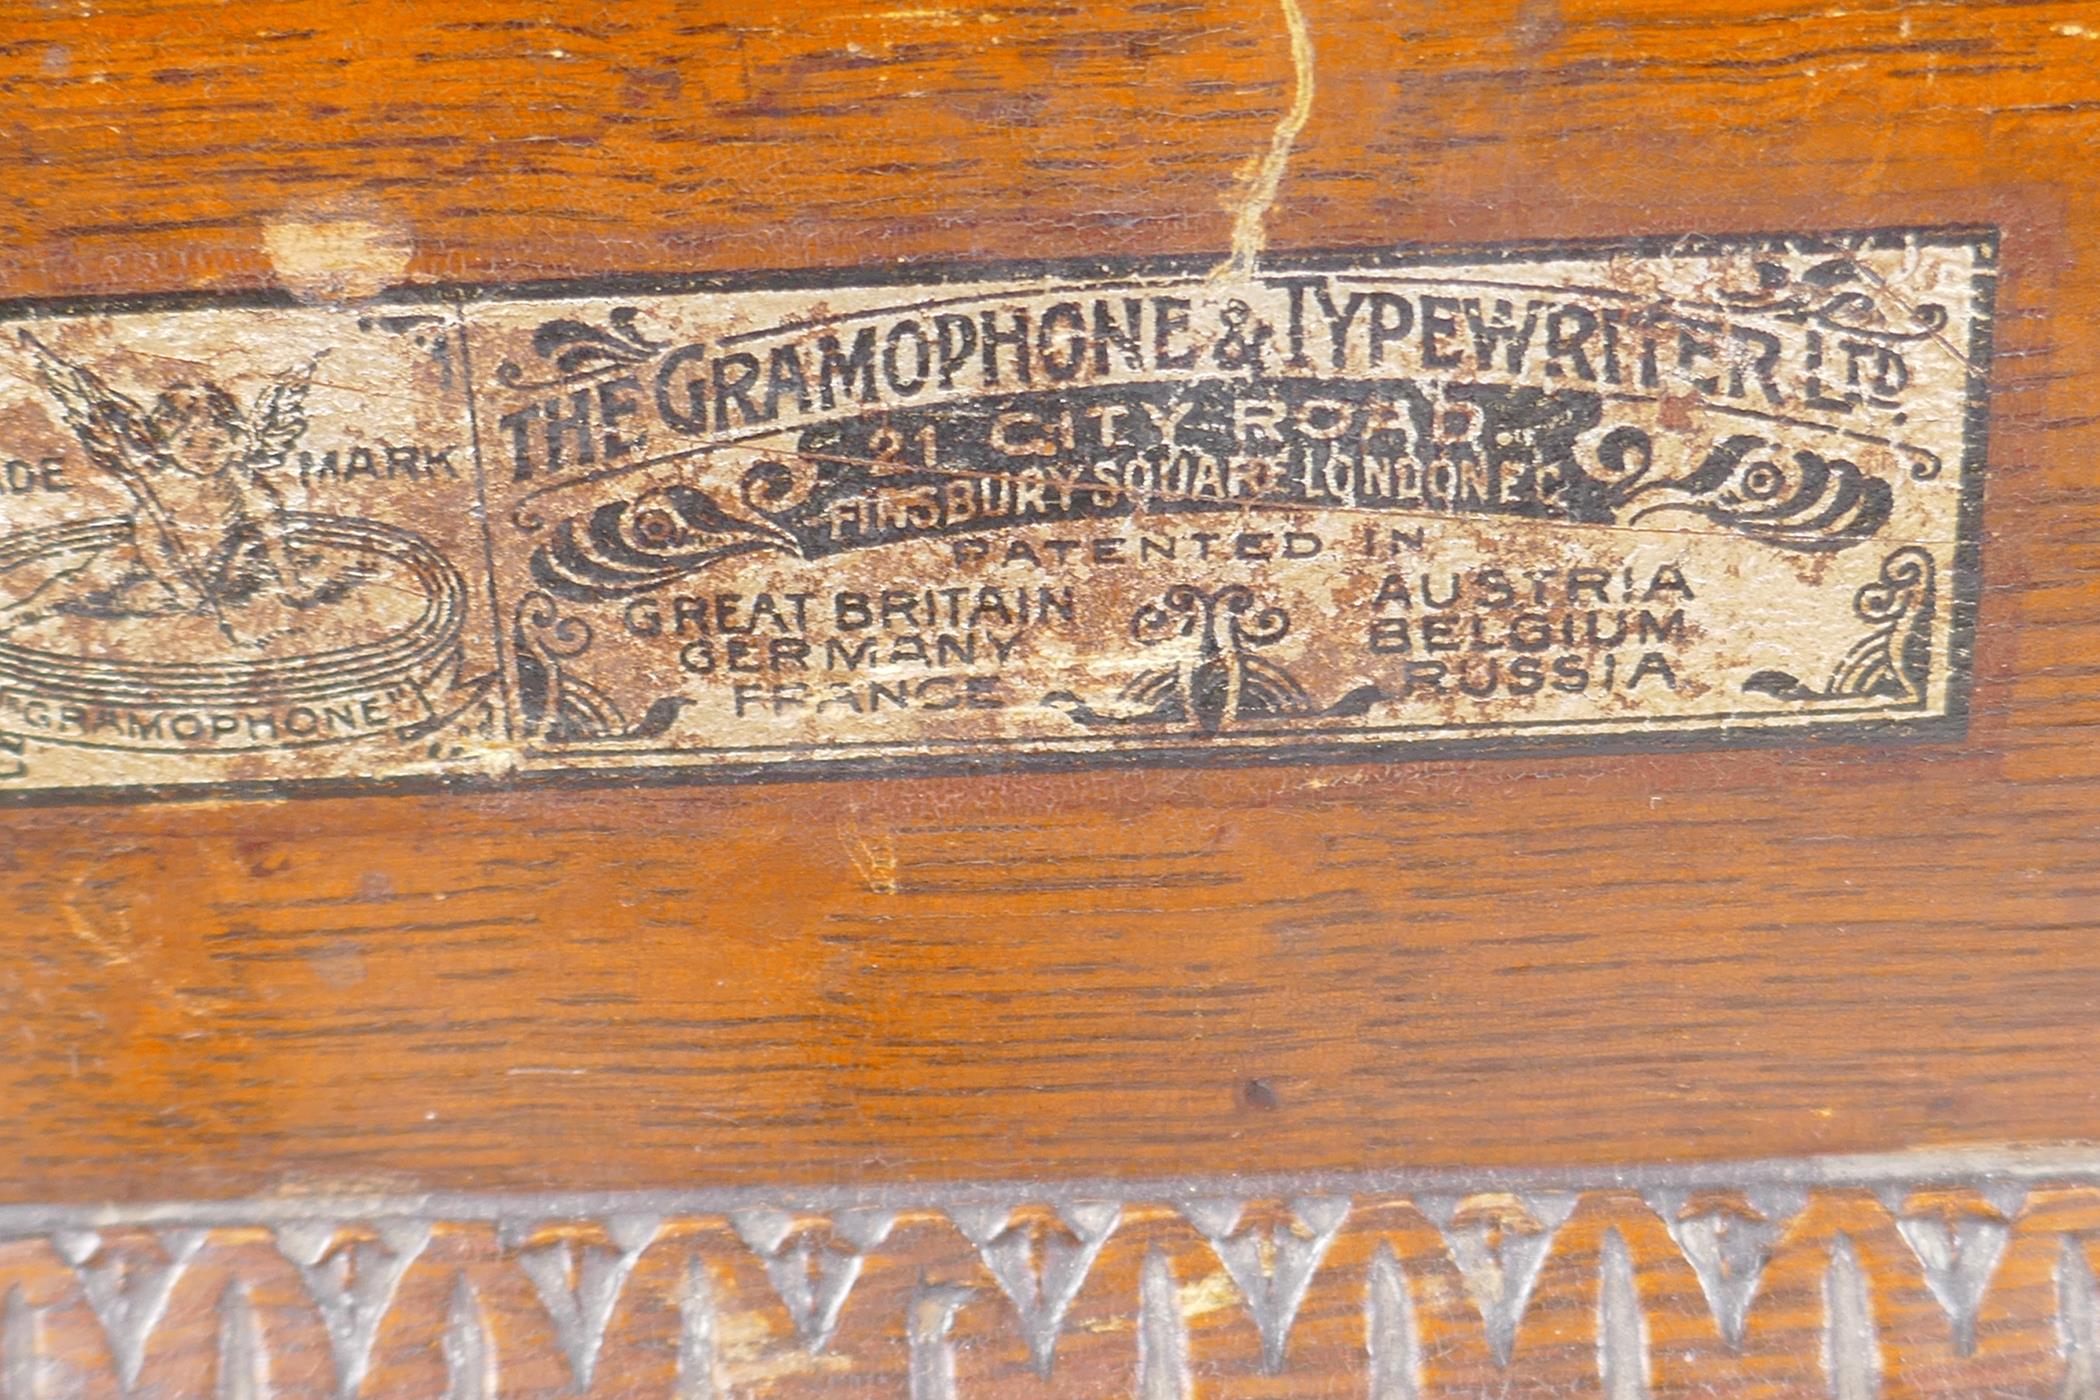 An antique horn gramaphone by The Gramaphone and Typewriter Company with angel trademark, part - Image 4 of 4